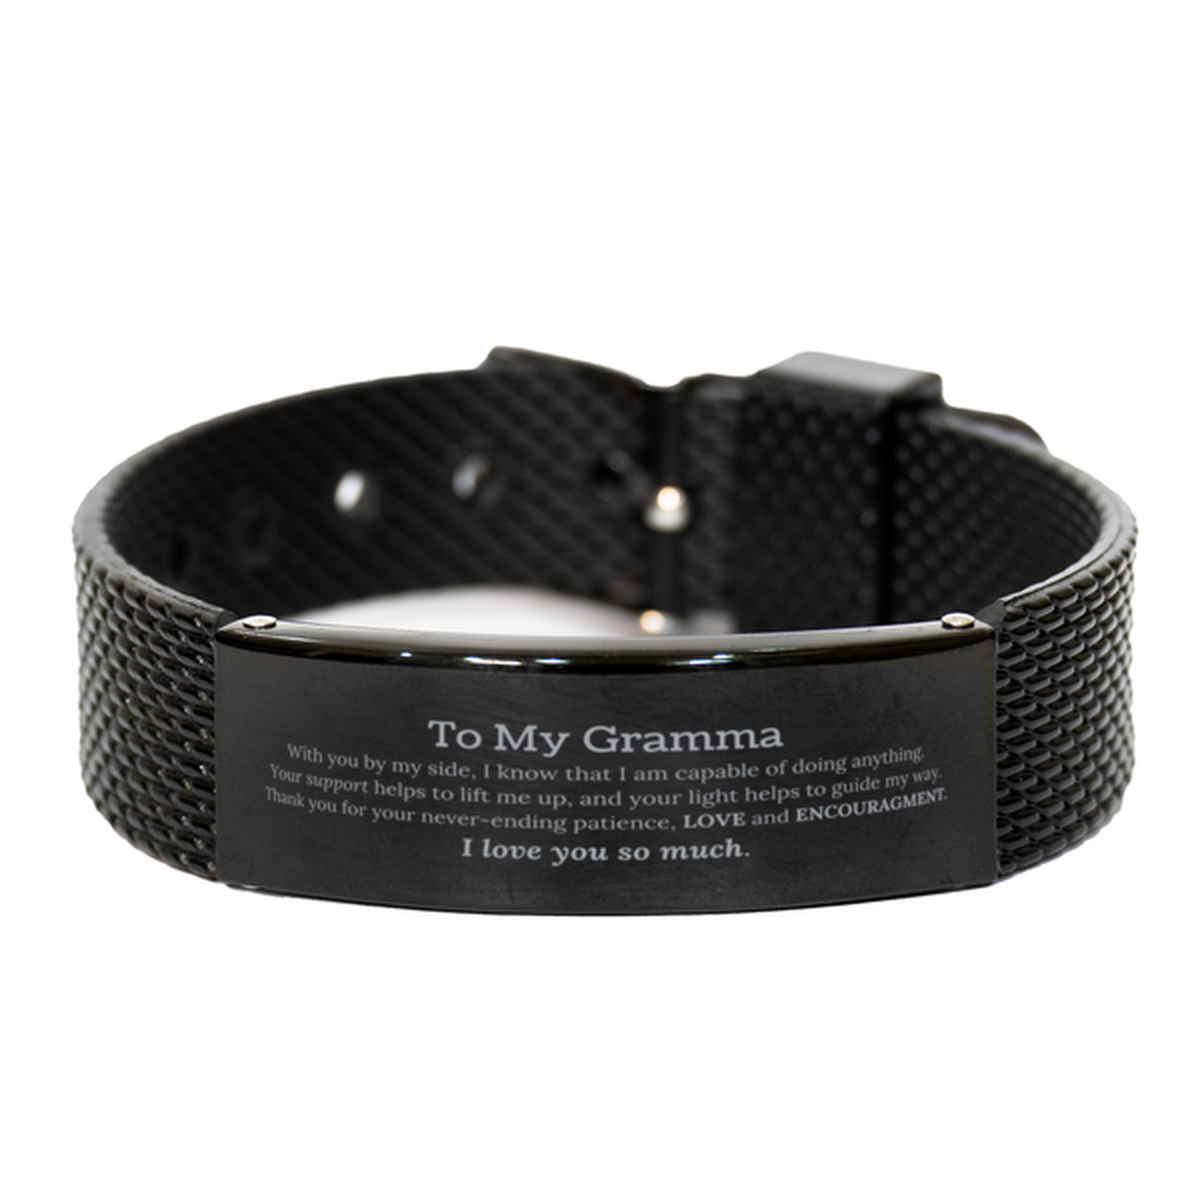 Appreciation Gramma Black Shark Mesh Bracelet Gifts, To My Gramma Birthday Christmas Wedding Keepsake Gifts for Gramma With you by my side, I know that I am capable of doing anything. I love you so much